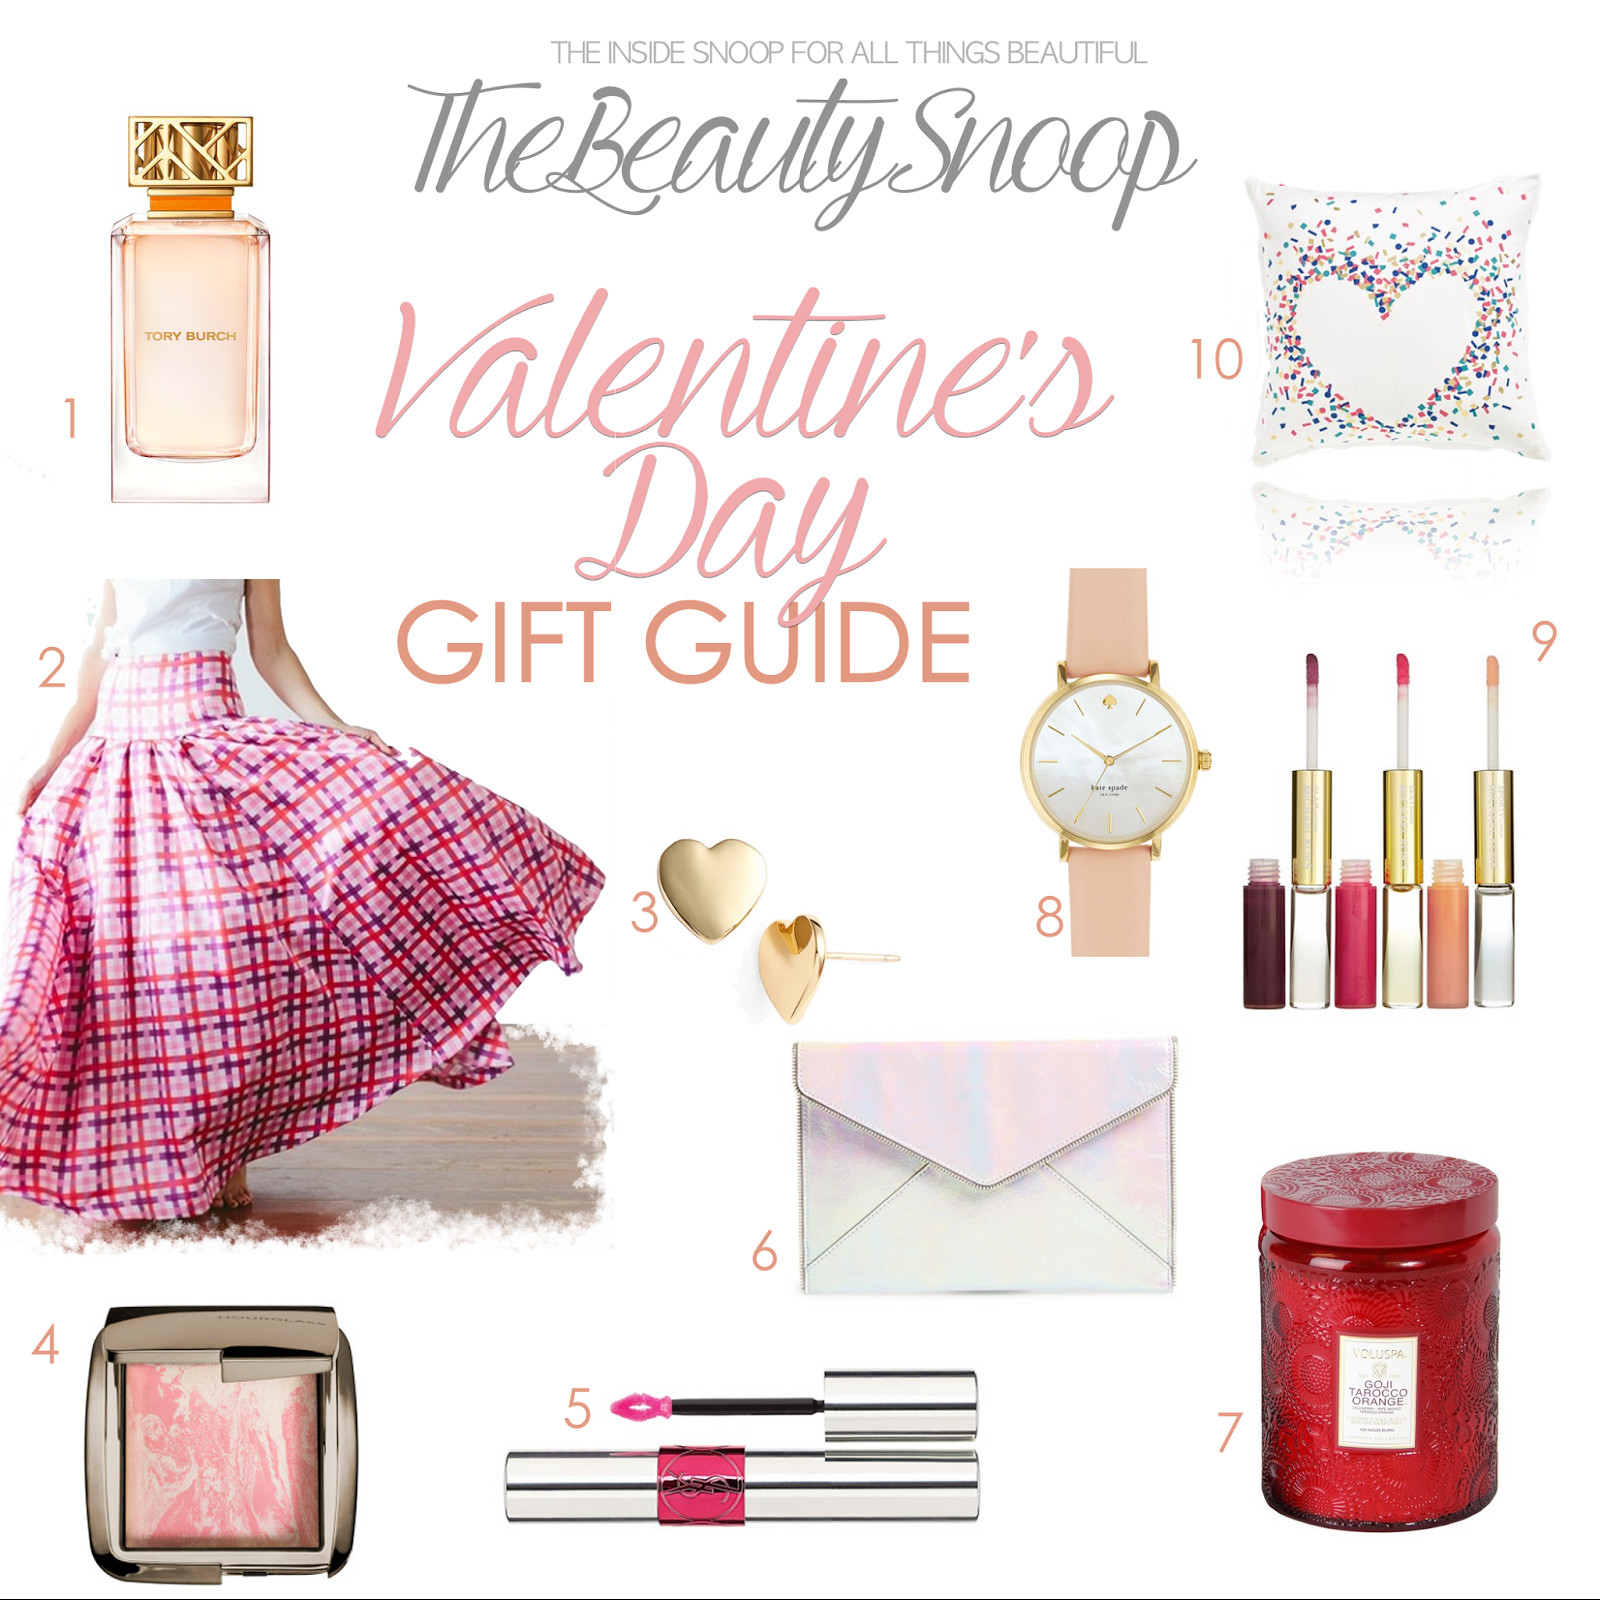 Valentines Creative Gift Ideas
 THE BEAUTY SNOOP LAST MINUTE VALENTINE S DAY GIFT IDEAS